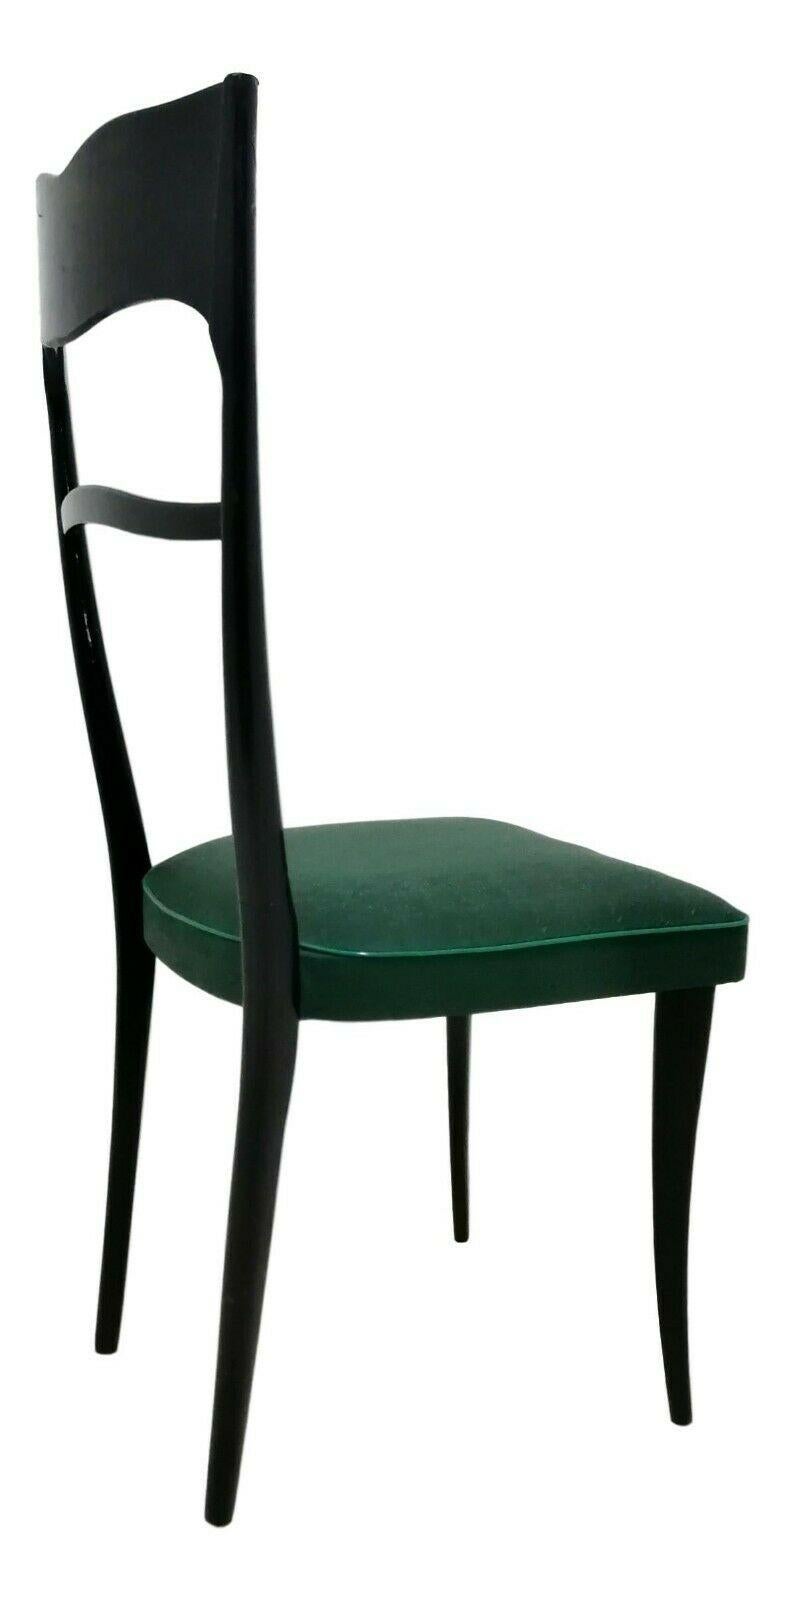 Set of four Italian design chairs from the 1960s, elegant production, made of wood, probably walnut, with bottle green skay upholstery

they measure 100 cm in height, 45 cm in width, 50 cm in depth and approximately 45 cm in height of the seat